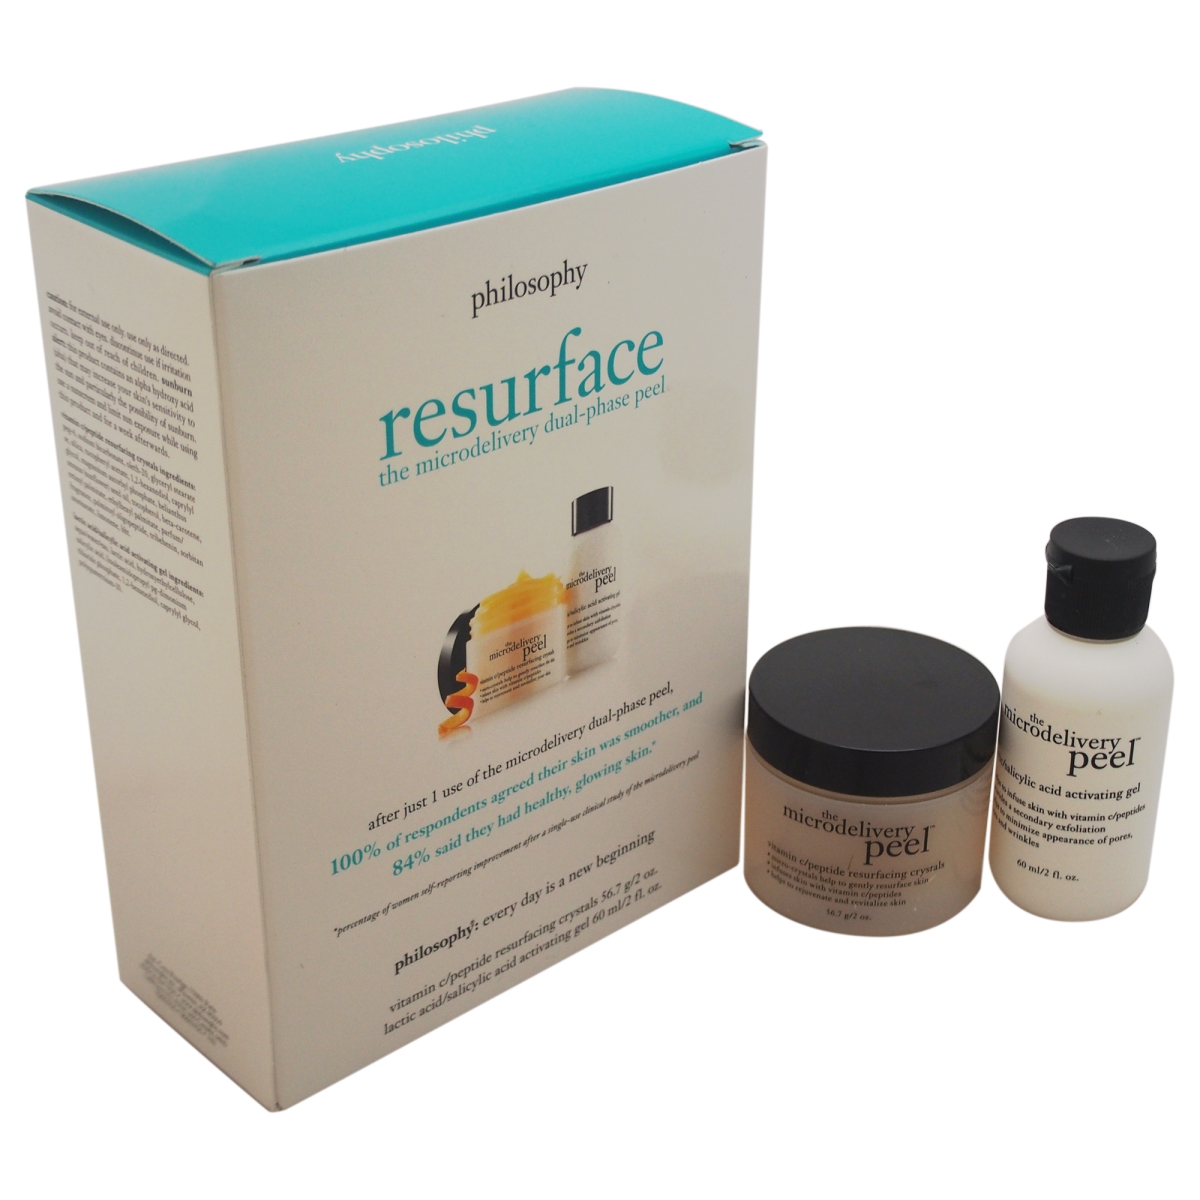 W-SC-2689 The Microdelivery In-Home Vitamin C Peptide Peel Kit for Women - 2 Piece